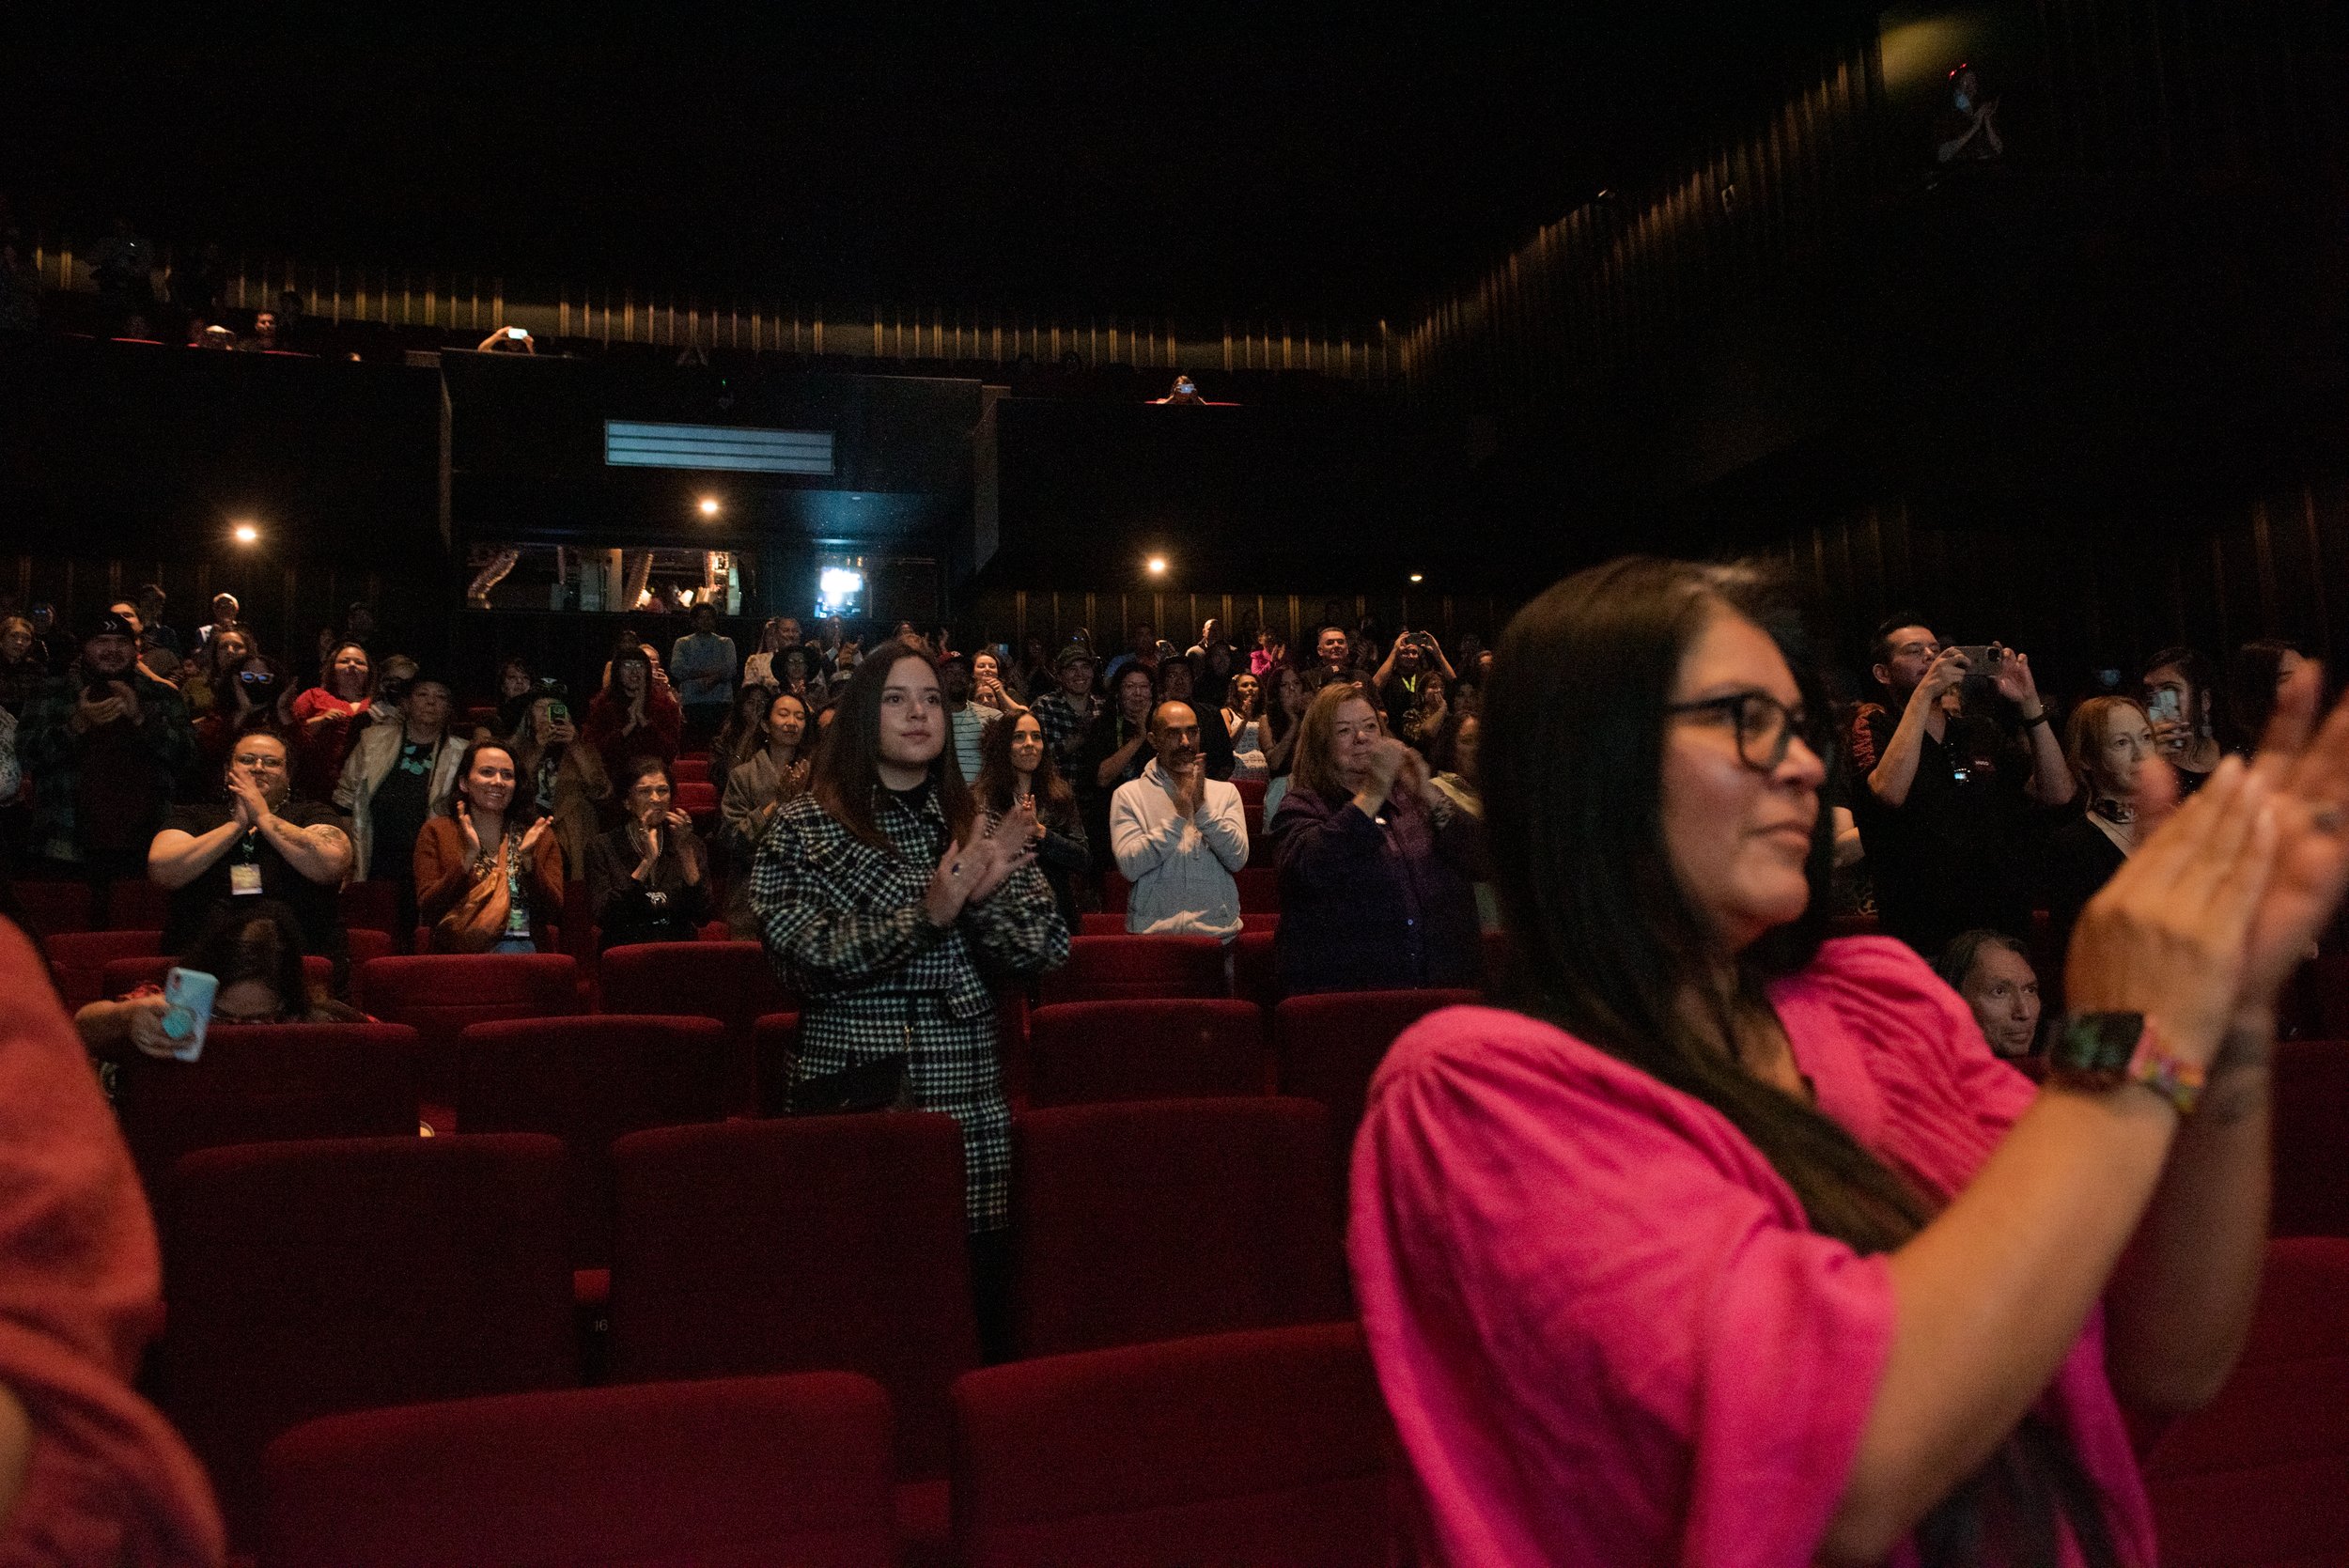 Festival attendees give a standing ovation. Image by Pengkuei Ben Huang.